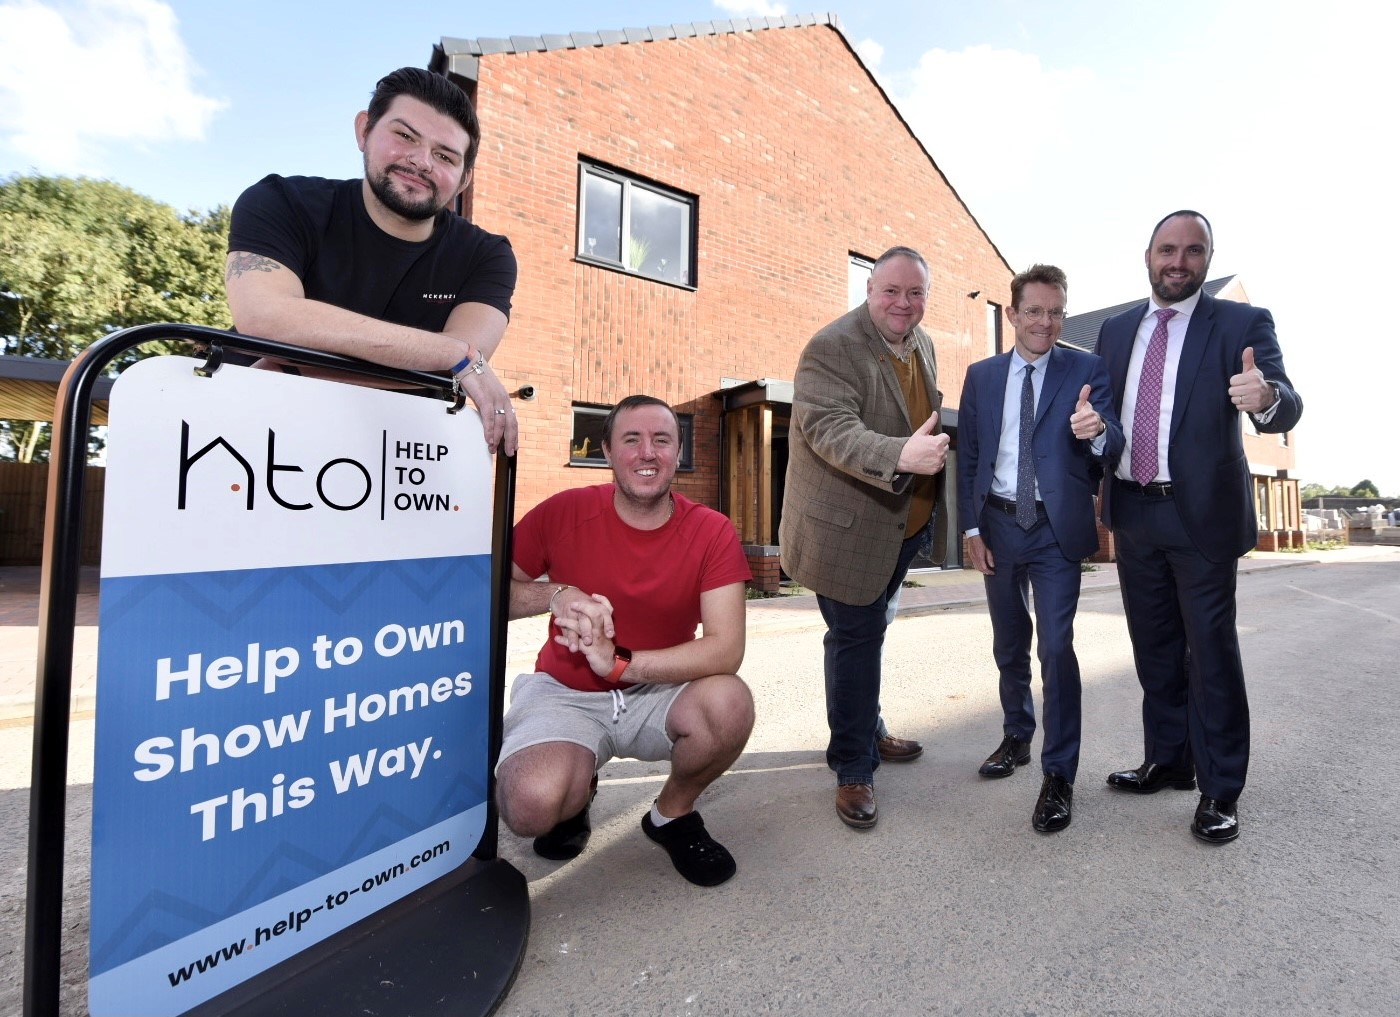 Help to Own tenants Timothy Perry (front left) and  Aaron Parsons (front right) outside their new home with (rear left to right) Cllr Stephen Simkins, Deputy Leader of City of Wolverhampton Council, Andy Street, Mayor of the West Midlands and chair of the WMCA and Sam Miller, Commercial Director - New Propositions at FDC